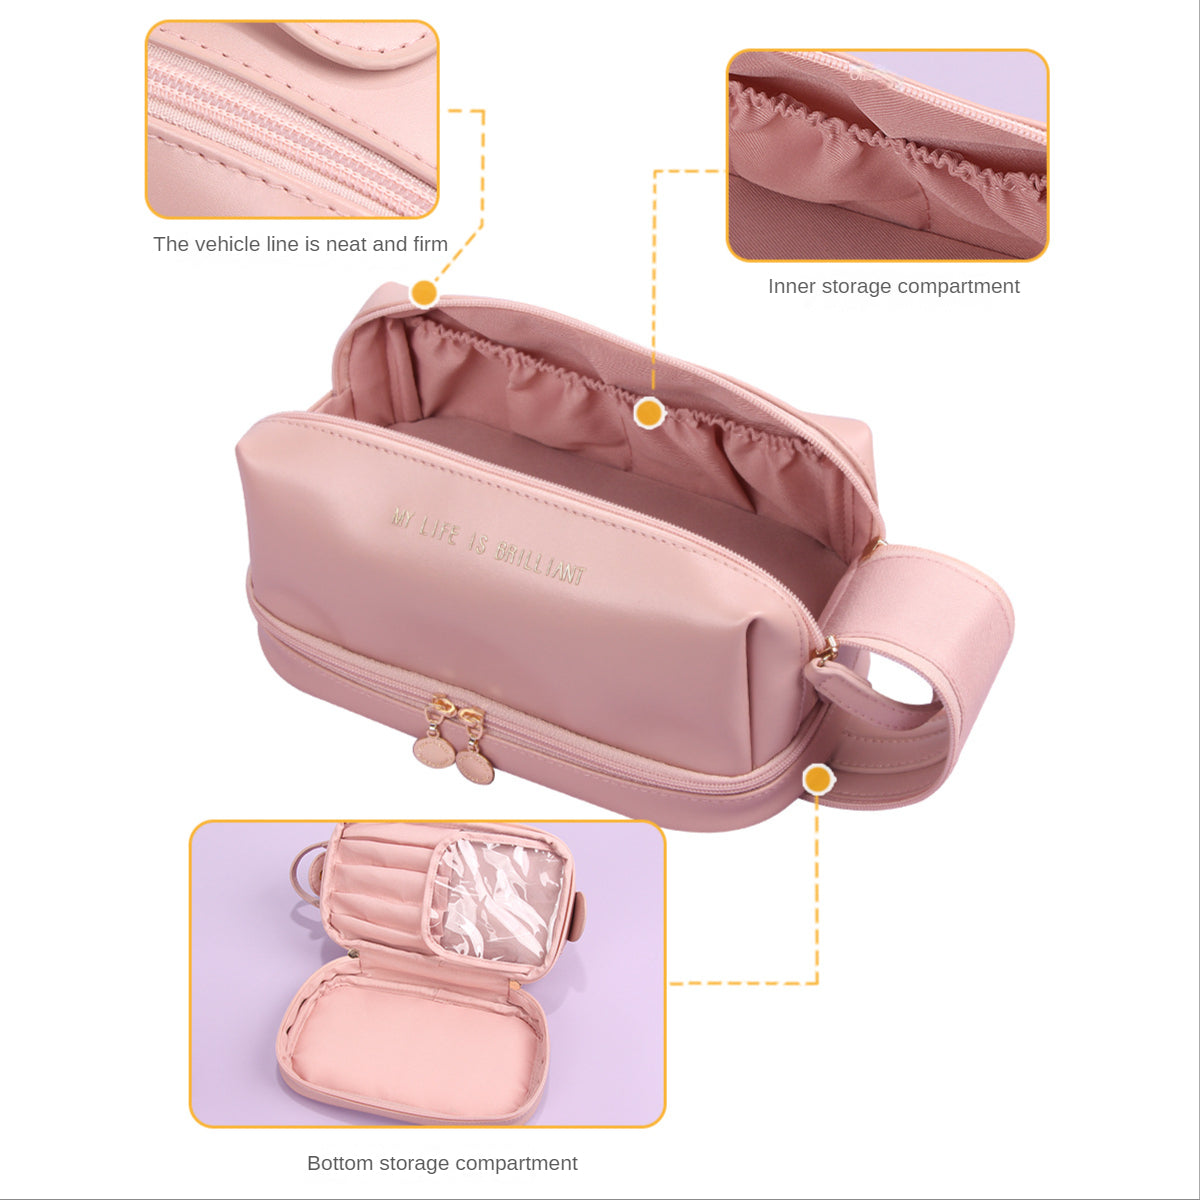 New PU leather female cosmetic bag large capacity ins advanced cosmetic bag online celebrity wash storage bag